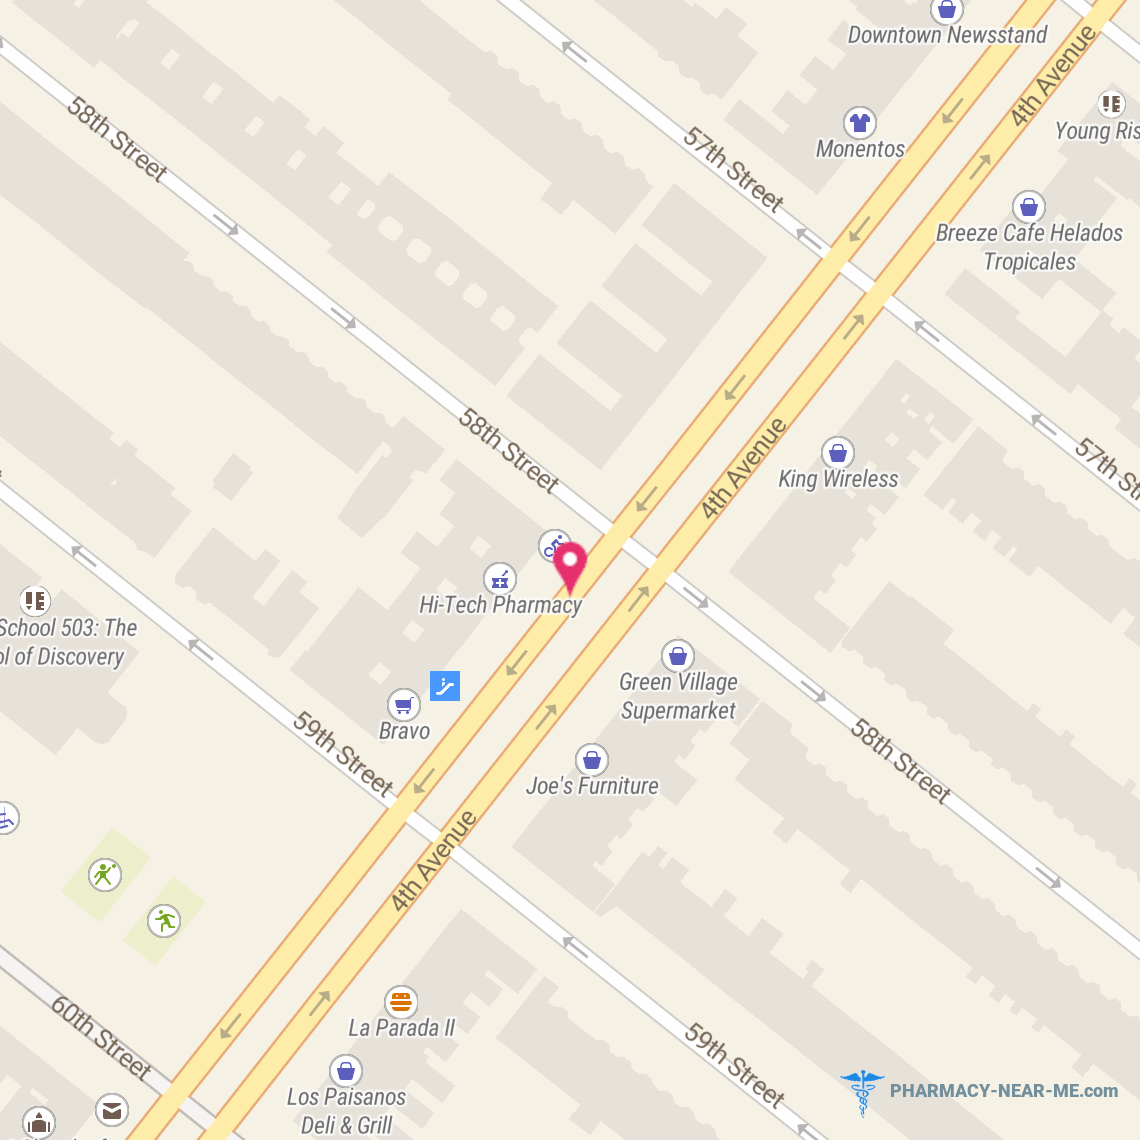 59 ST PHARMACY - Pharmacy Hours, Phone, Reviews & Information: 5816 4th Avenue, Brooklyn, New York 11220, United States